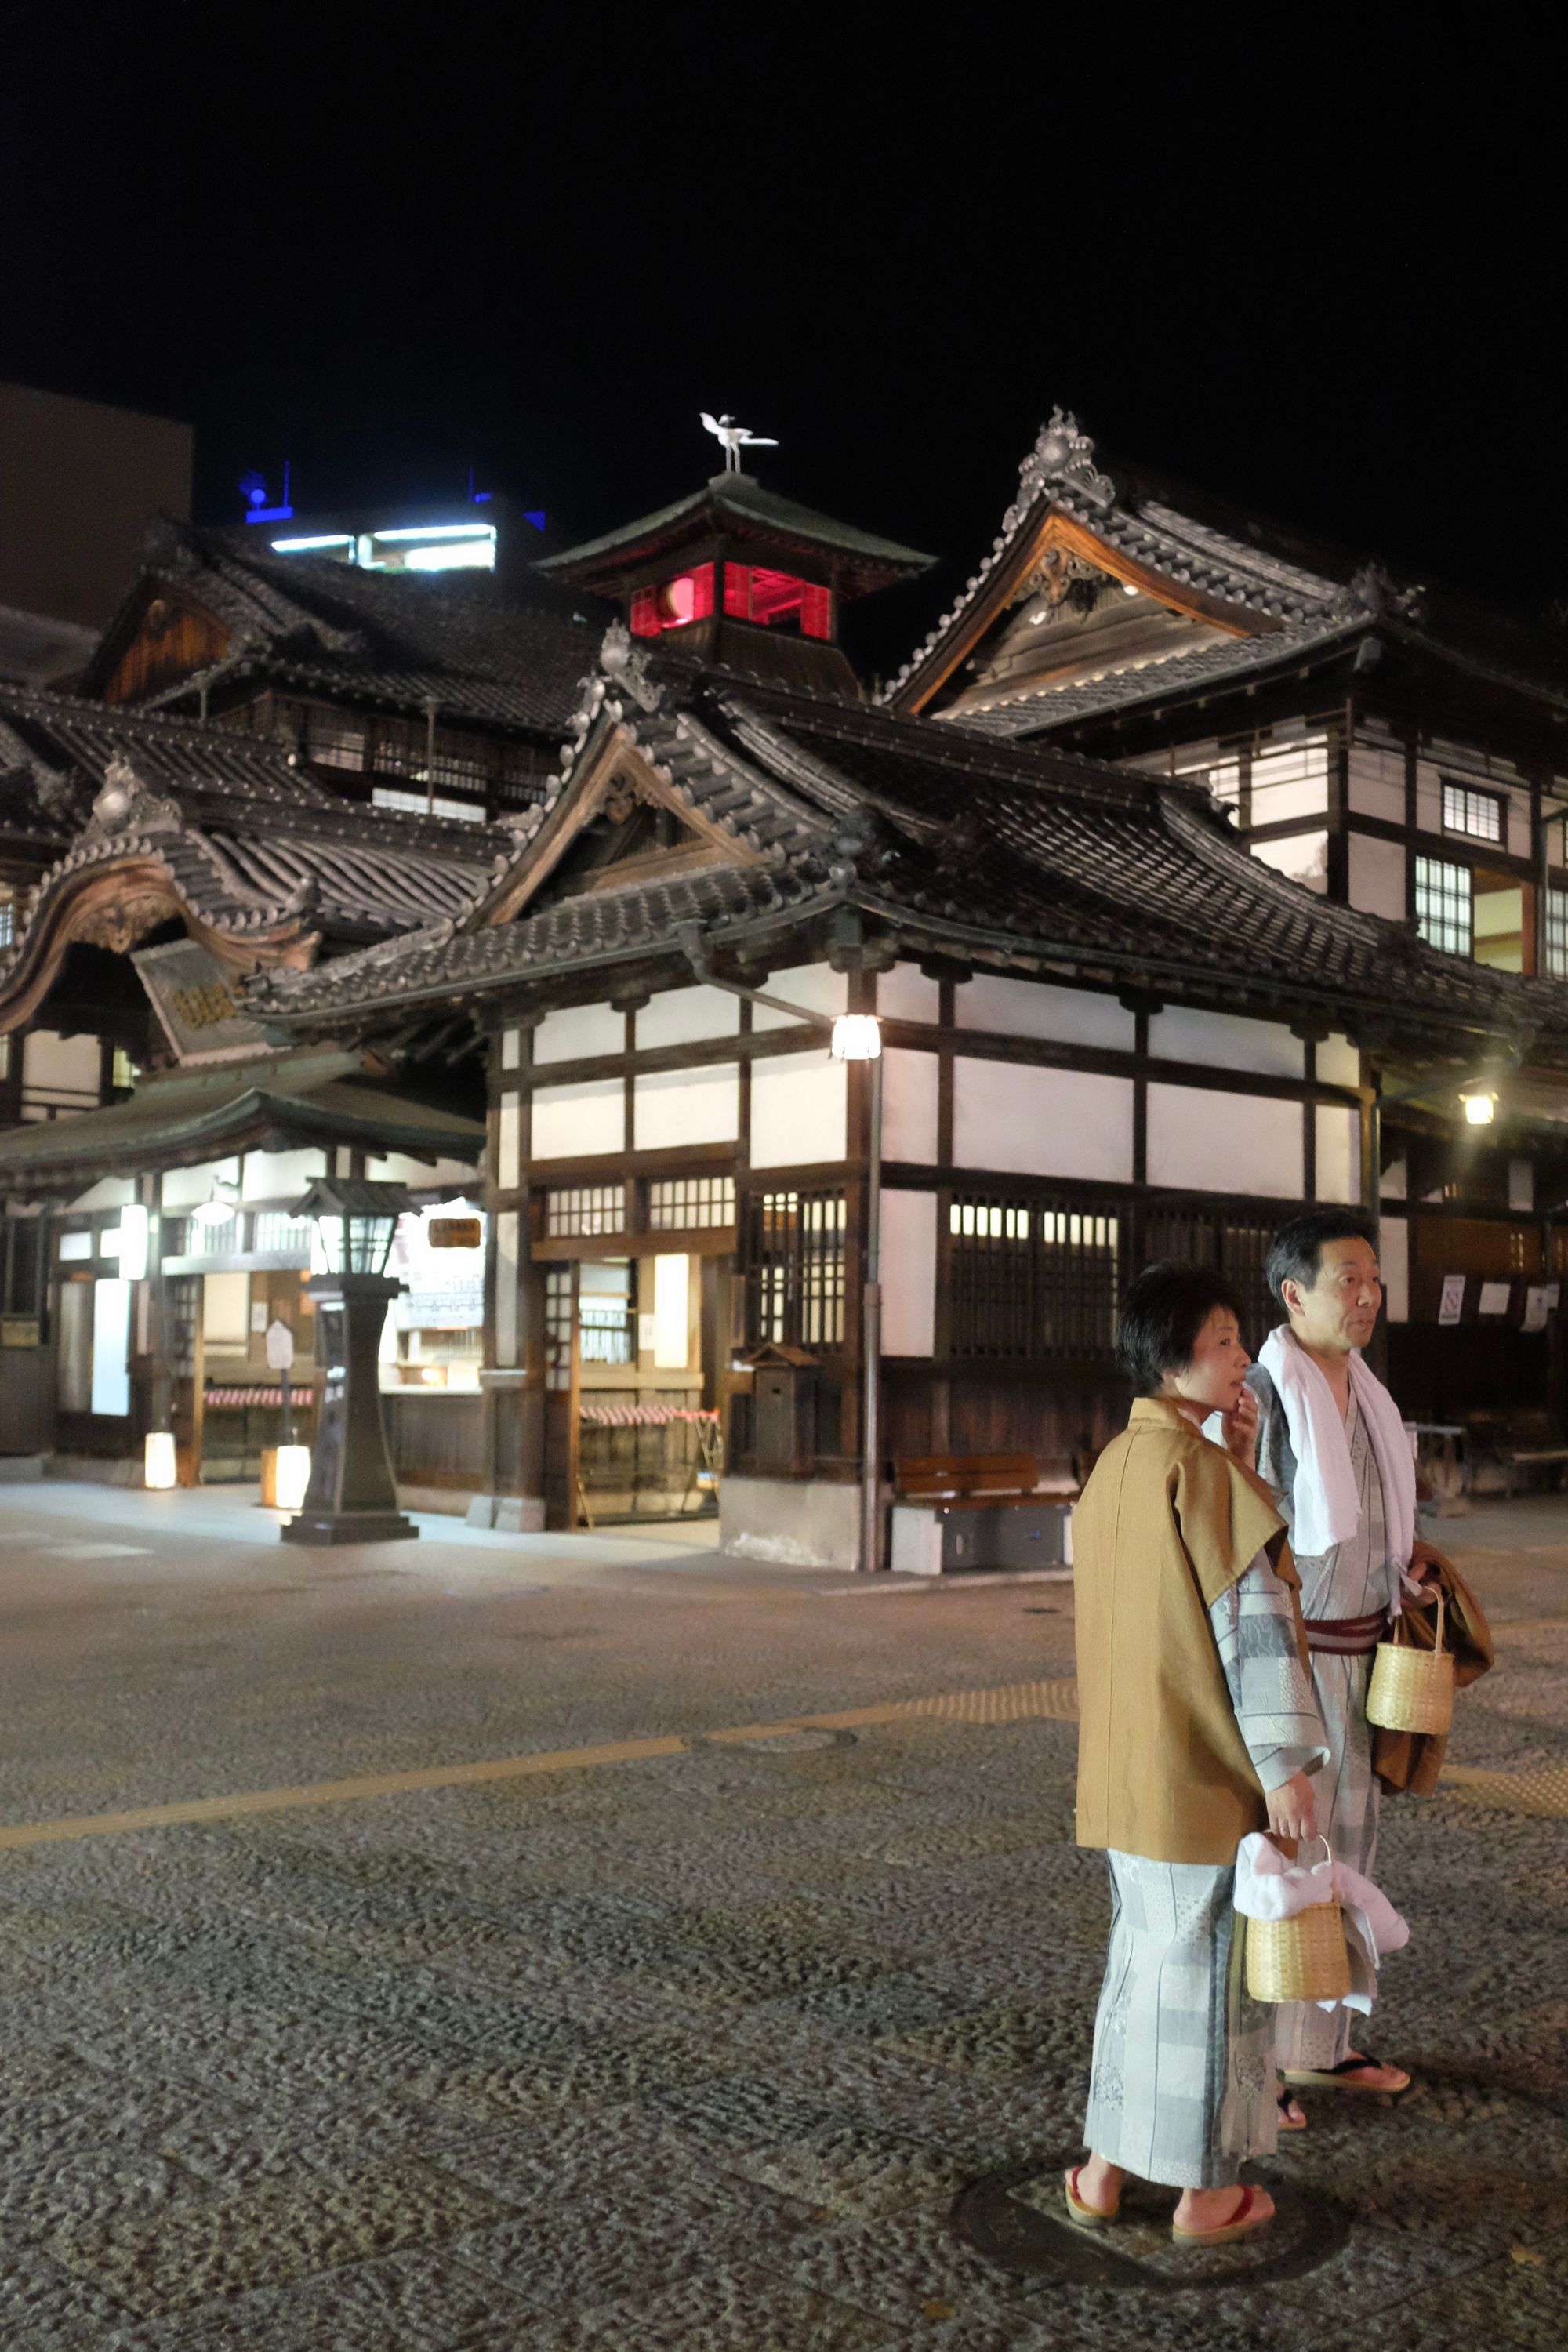 A Japanese couple, dressed in yukata and carrying bathing utensils, stands in front of the famous main building of Dōgo Onsen in the night.